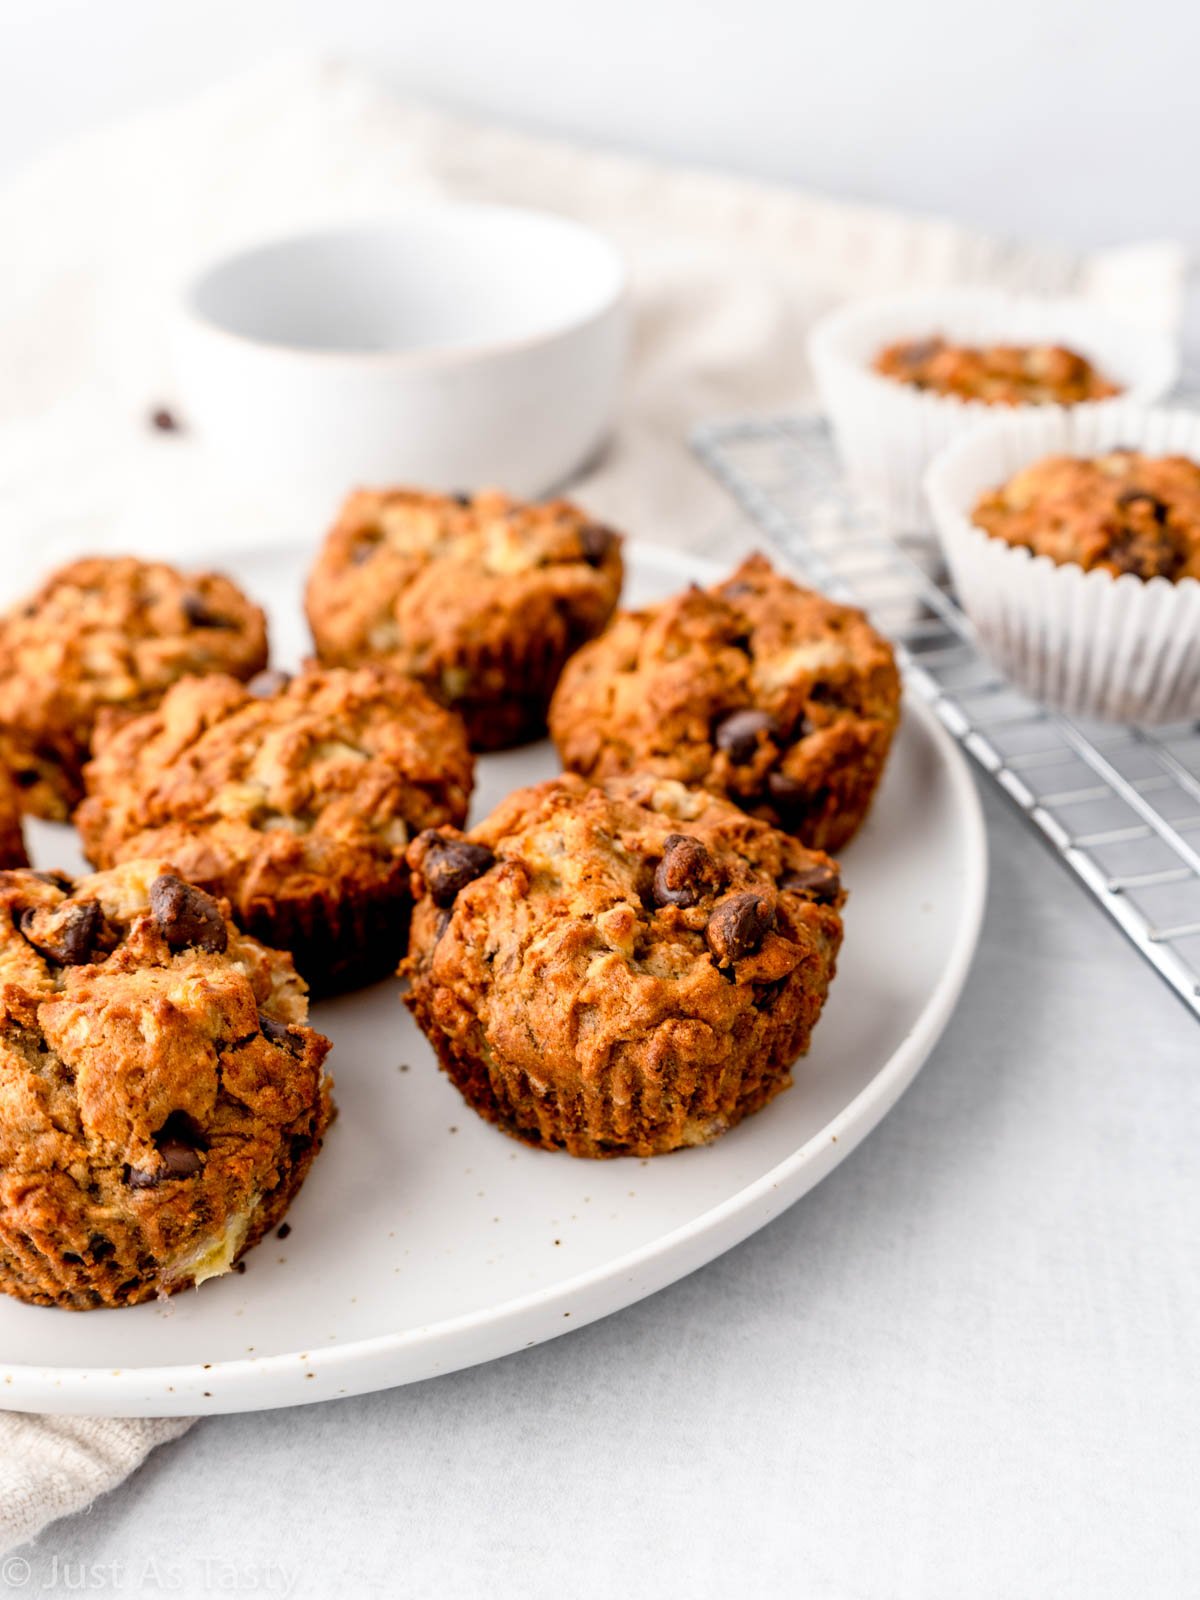 Banana chocolate chip muffins on a white plate.